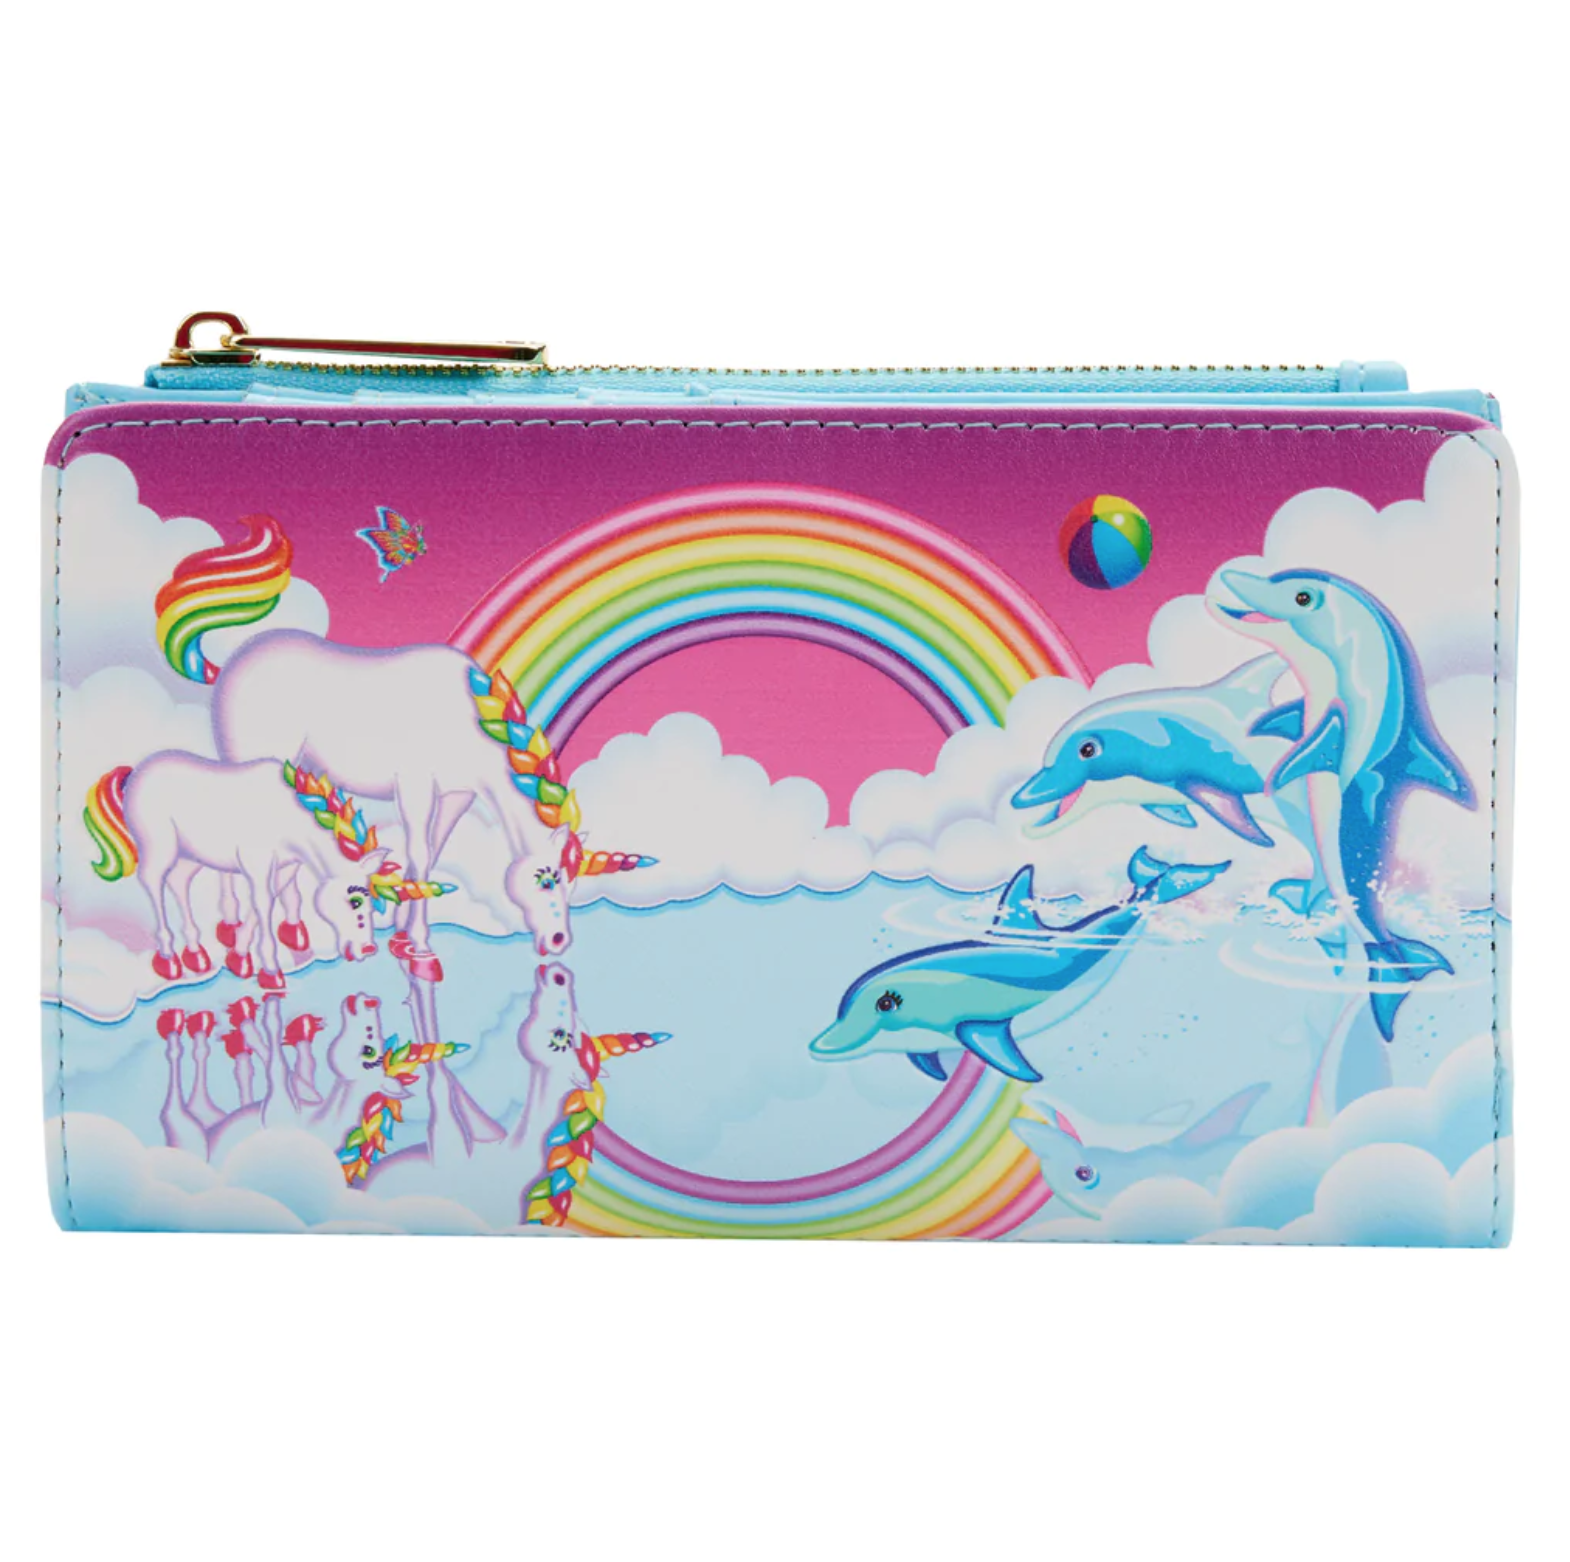  Loungefly Lisa Frank Iridescent Flap Wallet : Clothing